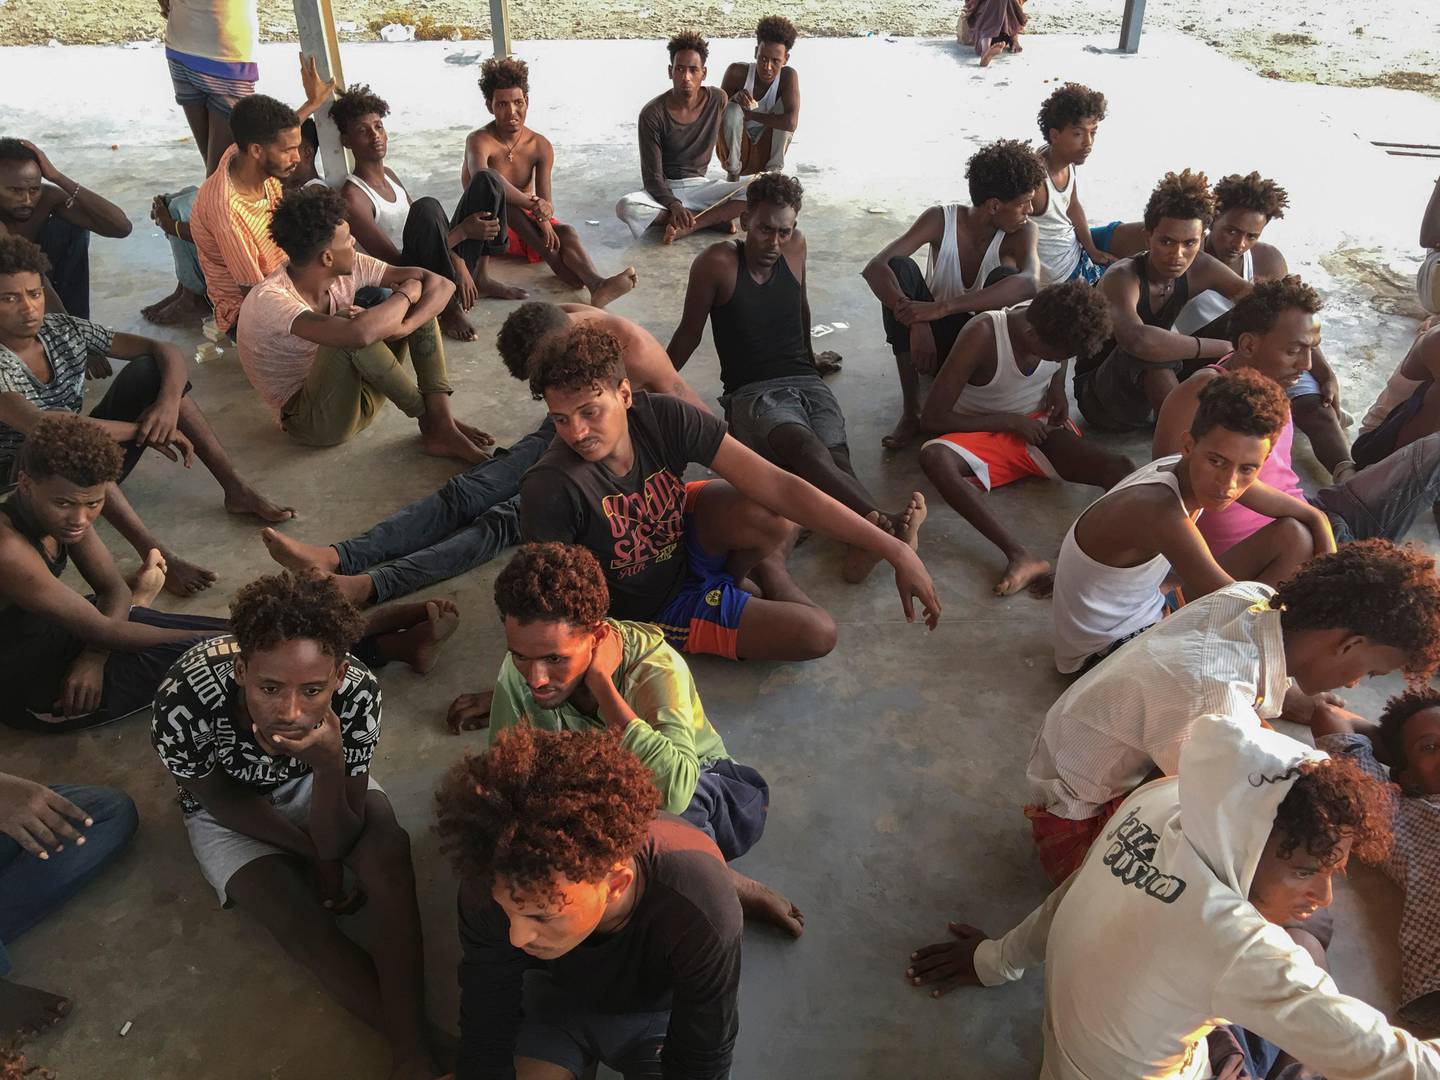 Rescued migrants sit on a coast some 100 kilometers (60 miles) east of Tripoli, Libya, Thursday, July 25, 2019. The U.N. refugee agency and the International Rescue Committee say up to 150 may have perished at sea off the coast of Libya. The country's coast guard says the Europe-bound migrants are missing and feared drowned after the boats they were traveling on capsized in the Mediterranean Sea. A spokesman says they rescued around 137 migrants on Thursday. (AP Photo/Hazem Ahmed)